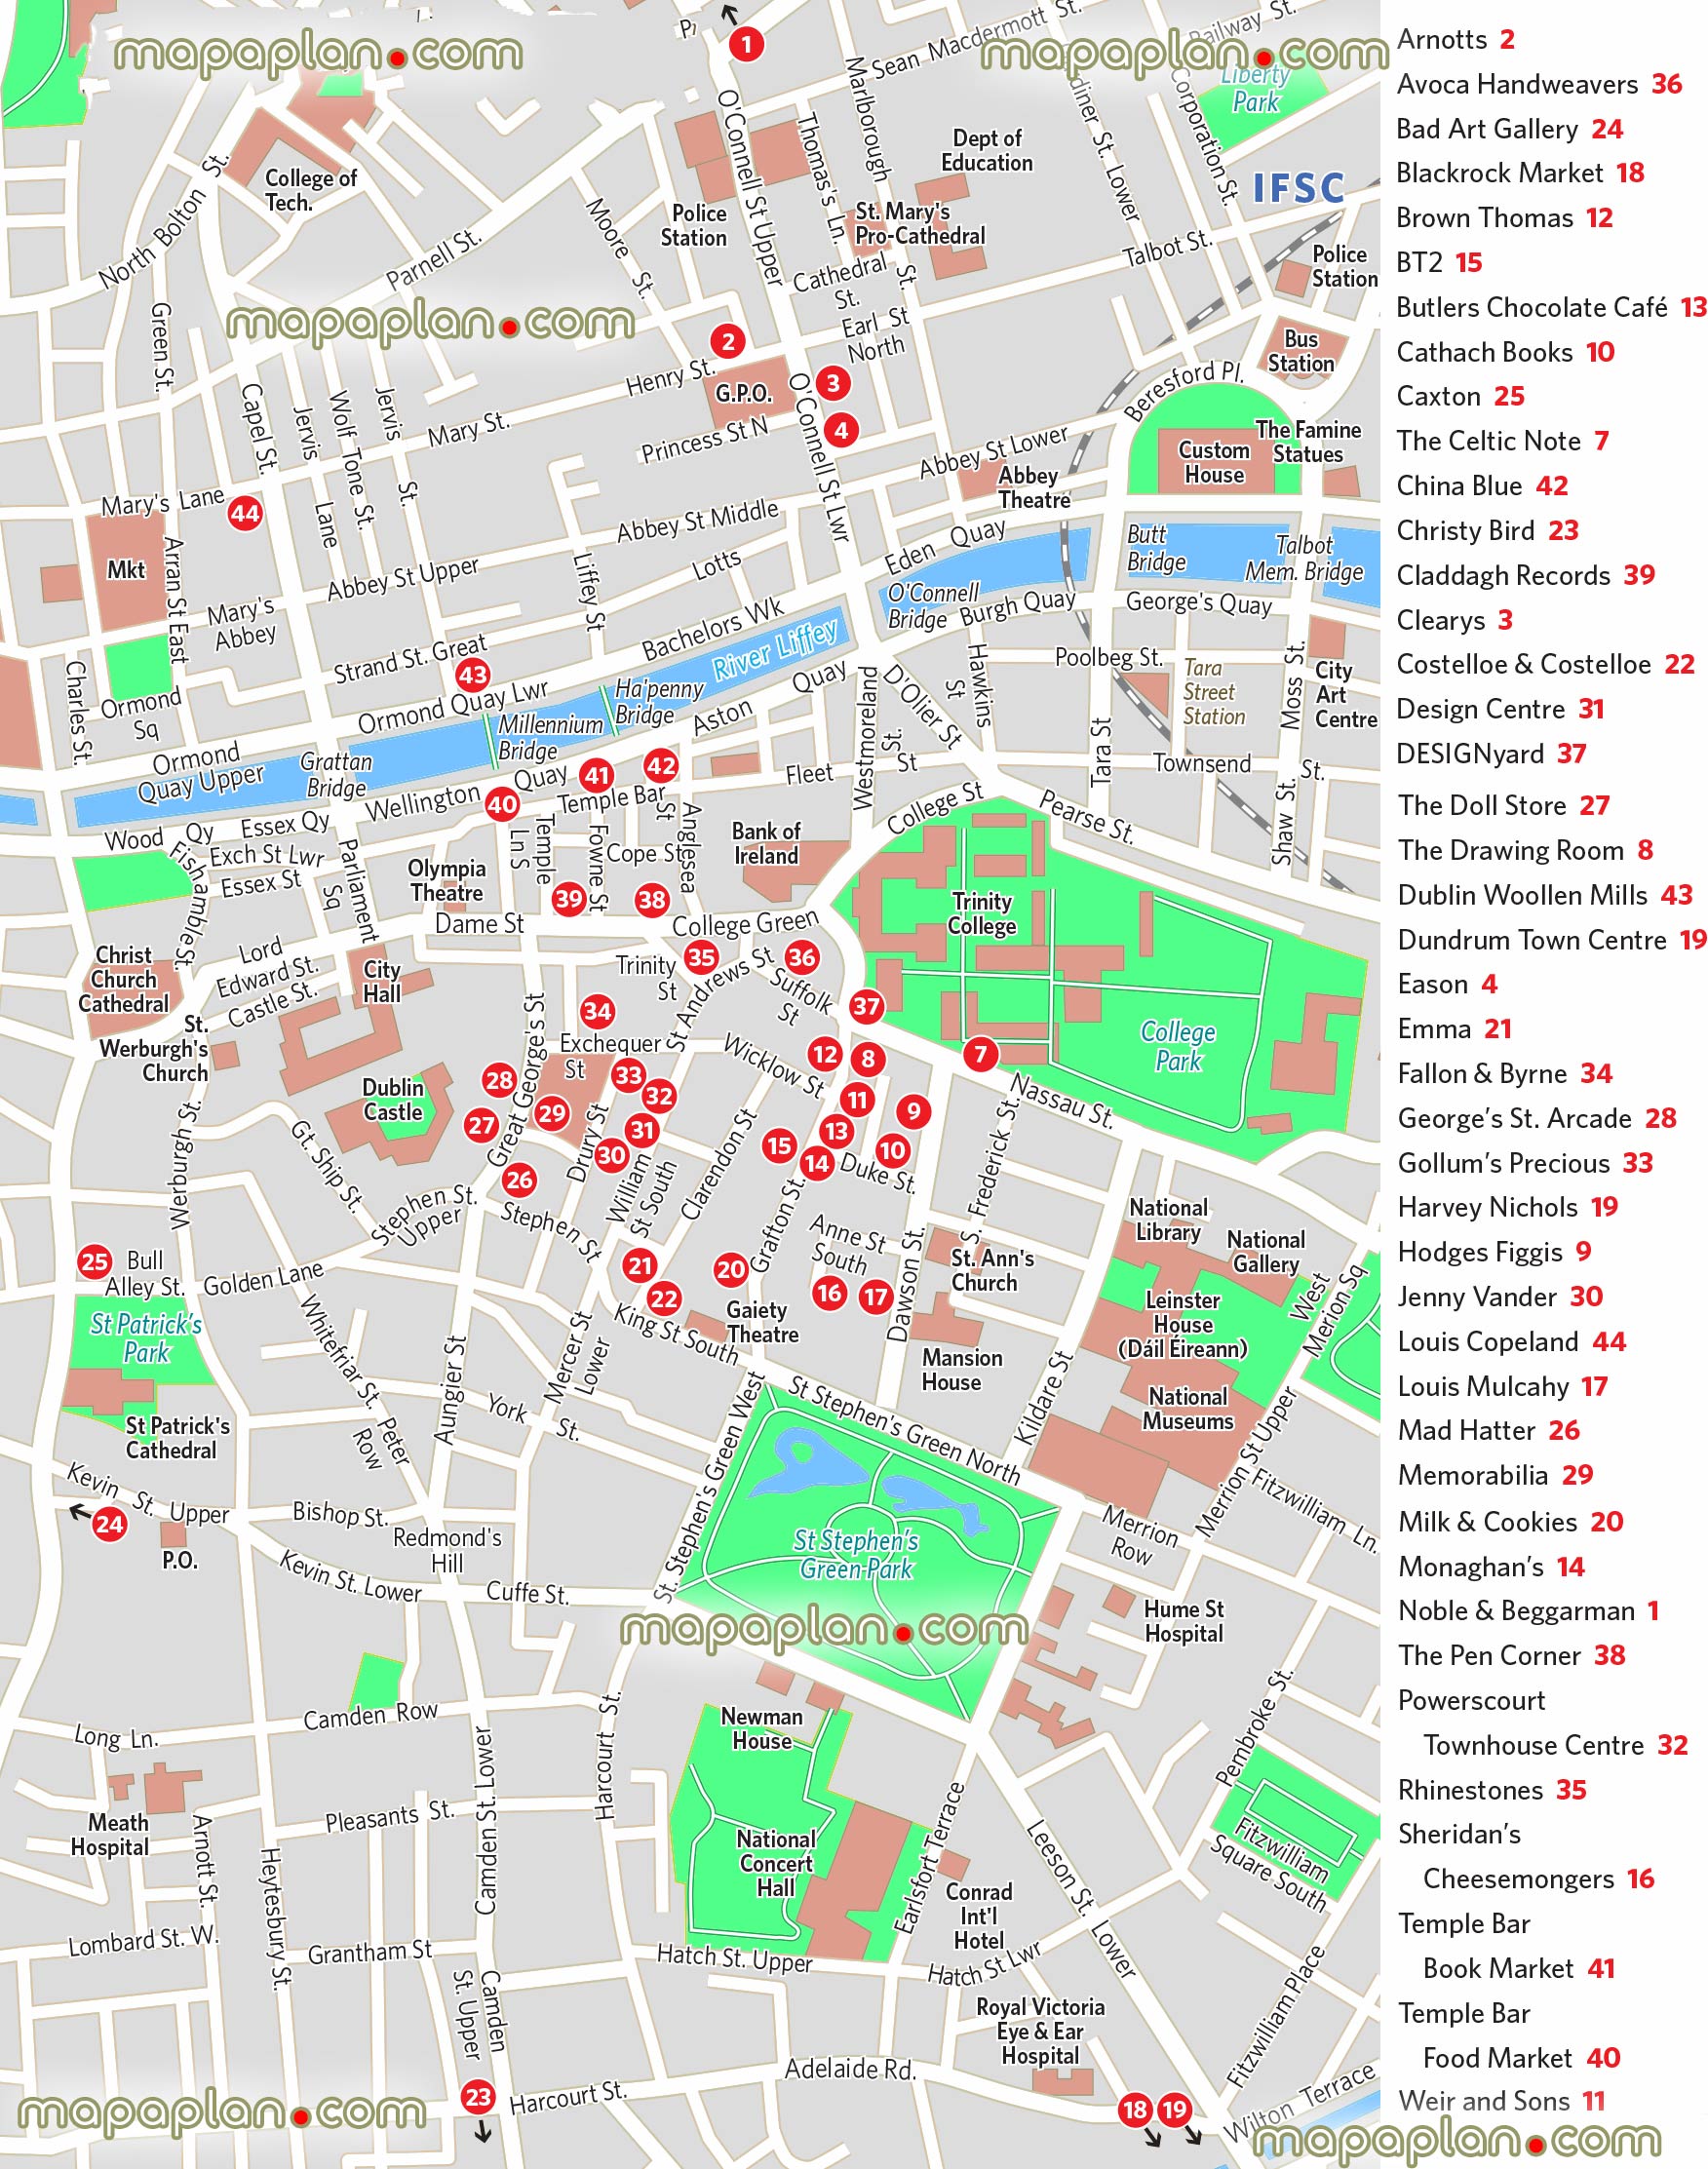 shopping street major department stores list most popular shops favourite shopping destinations itinerary planner navigation guide maps Dublin Top tourist attractions map